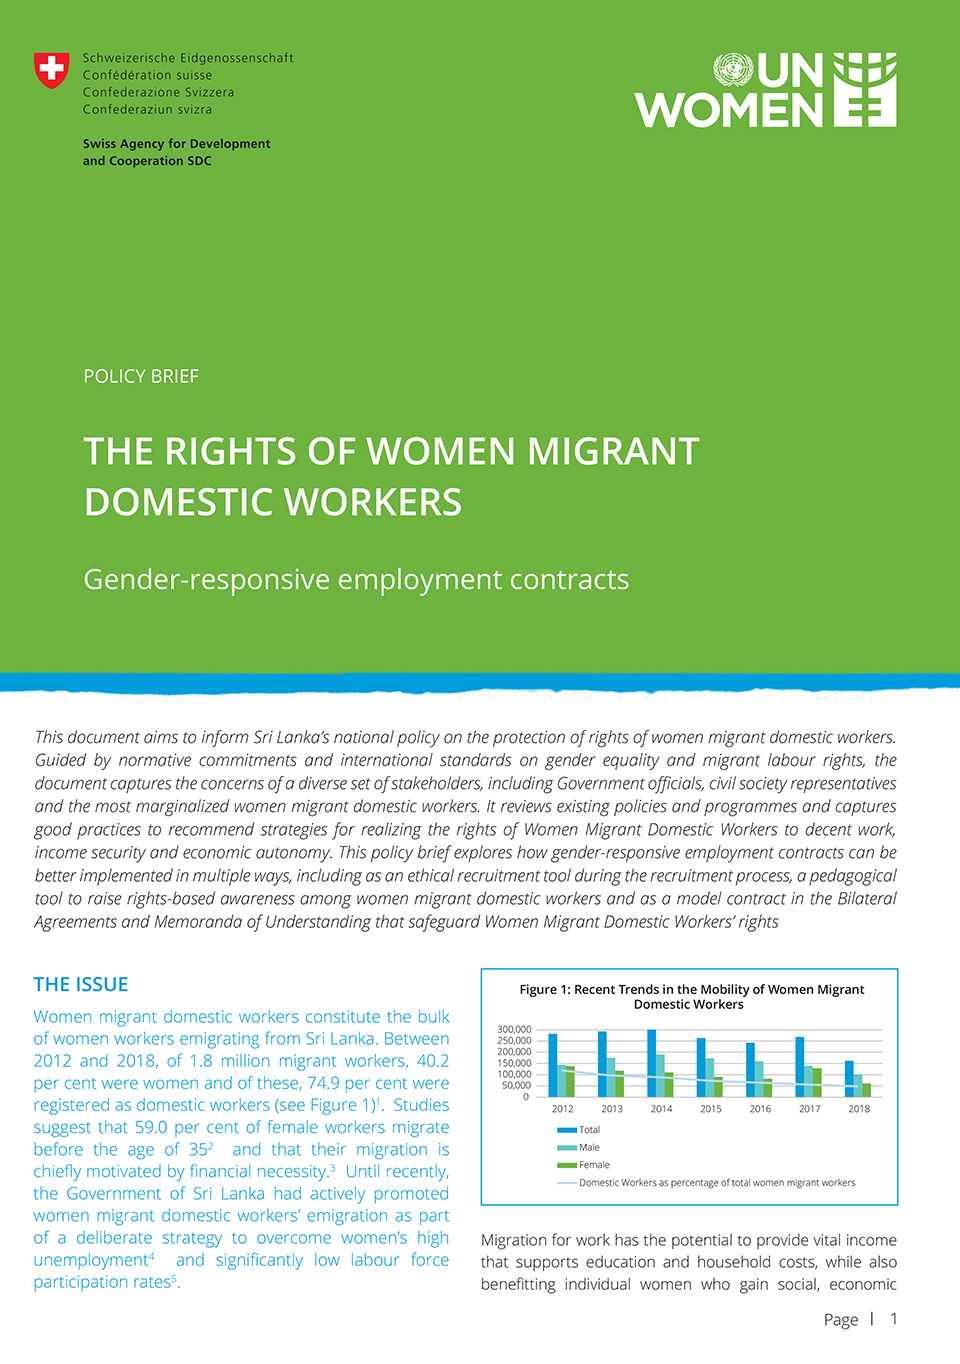 POLICY BRIEF: The rights of women migrant domestic workers | Gender-responsive employment contracts